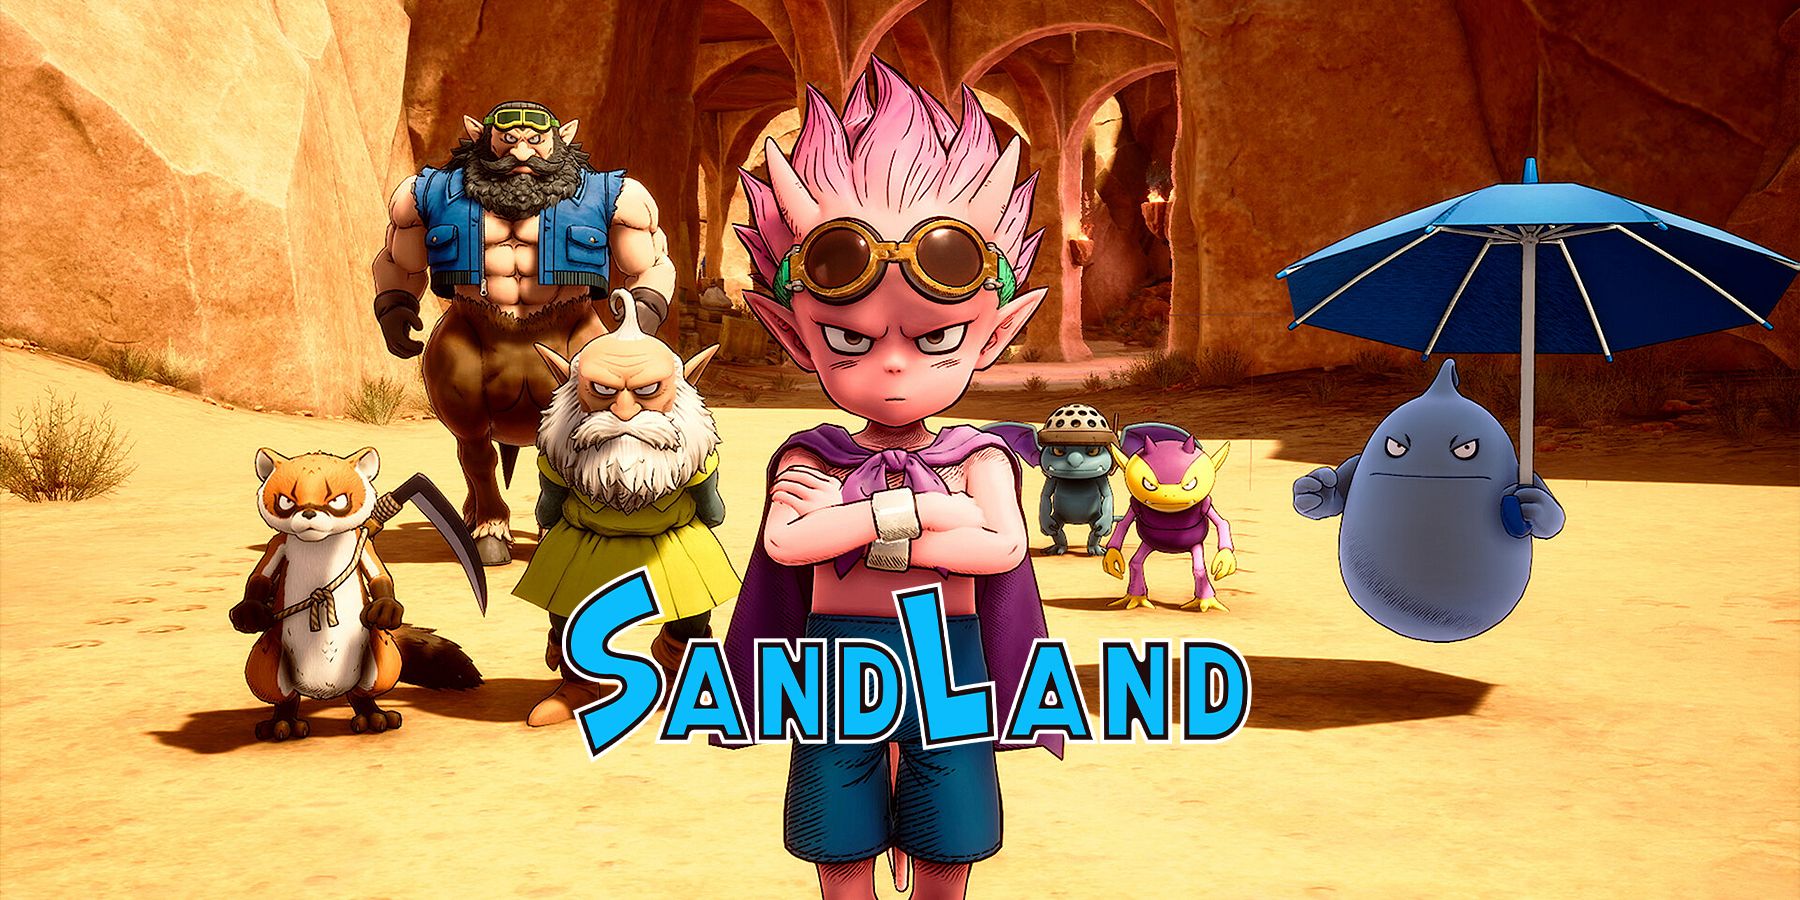 Beelzebub and his friends standing together with the Sand Land logo